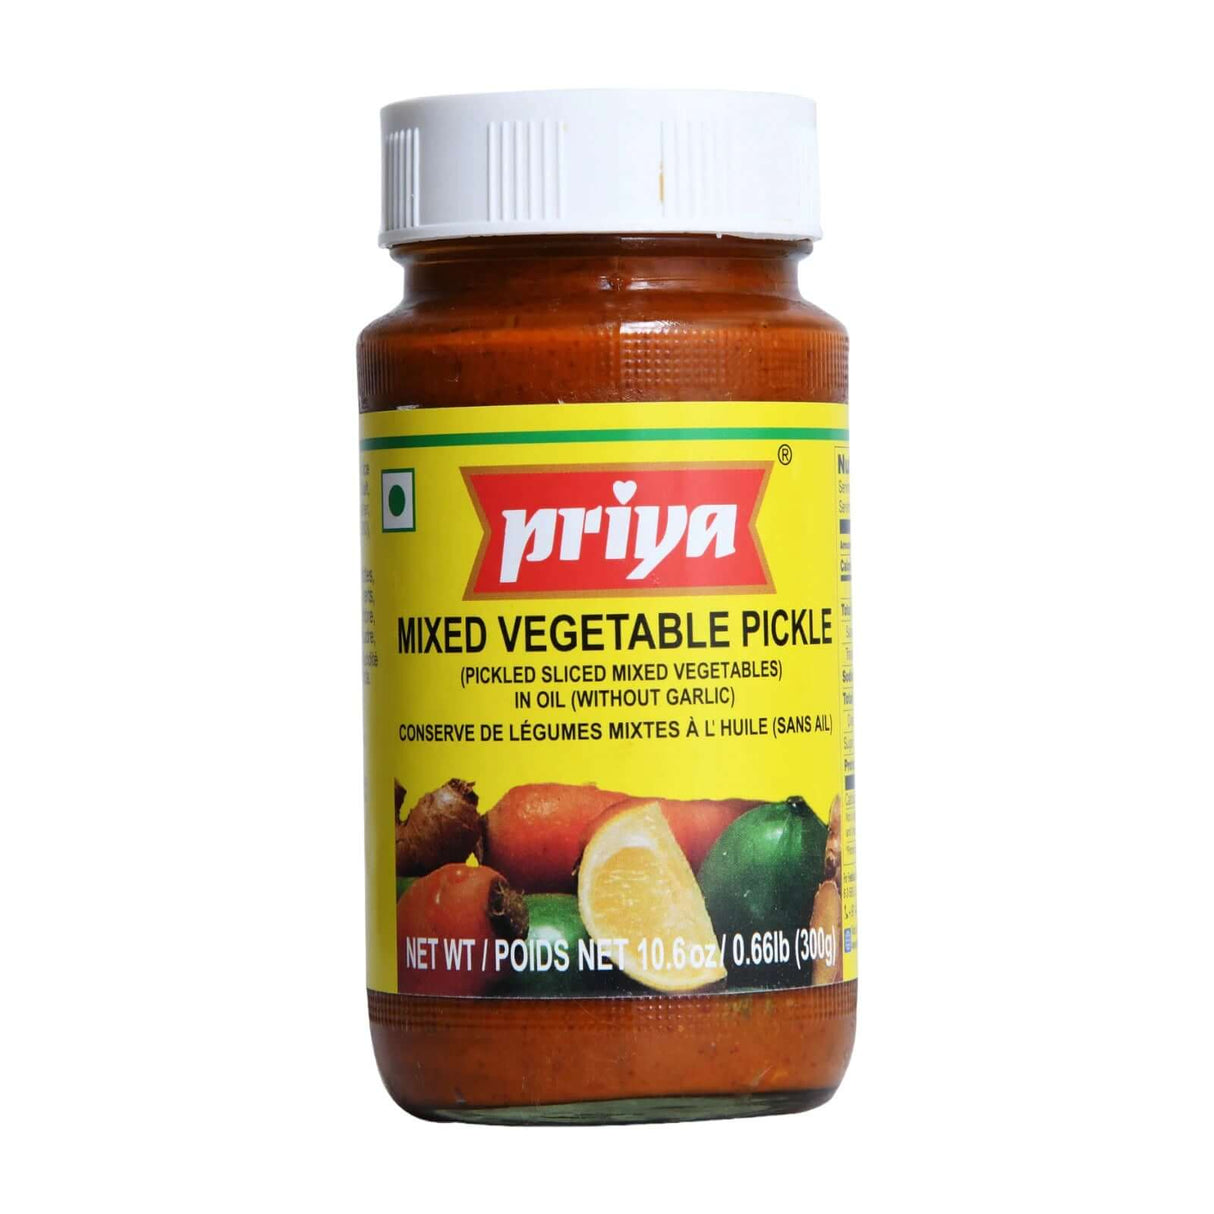 Priya Mixed Vegetable Pickle in Oil (without Garlic)